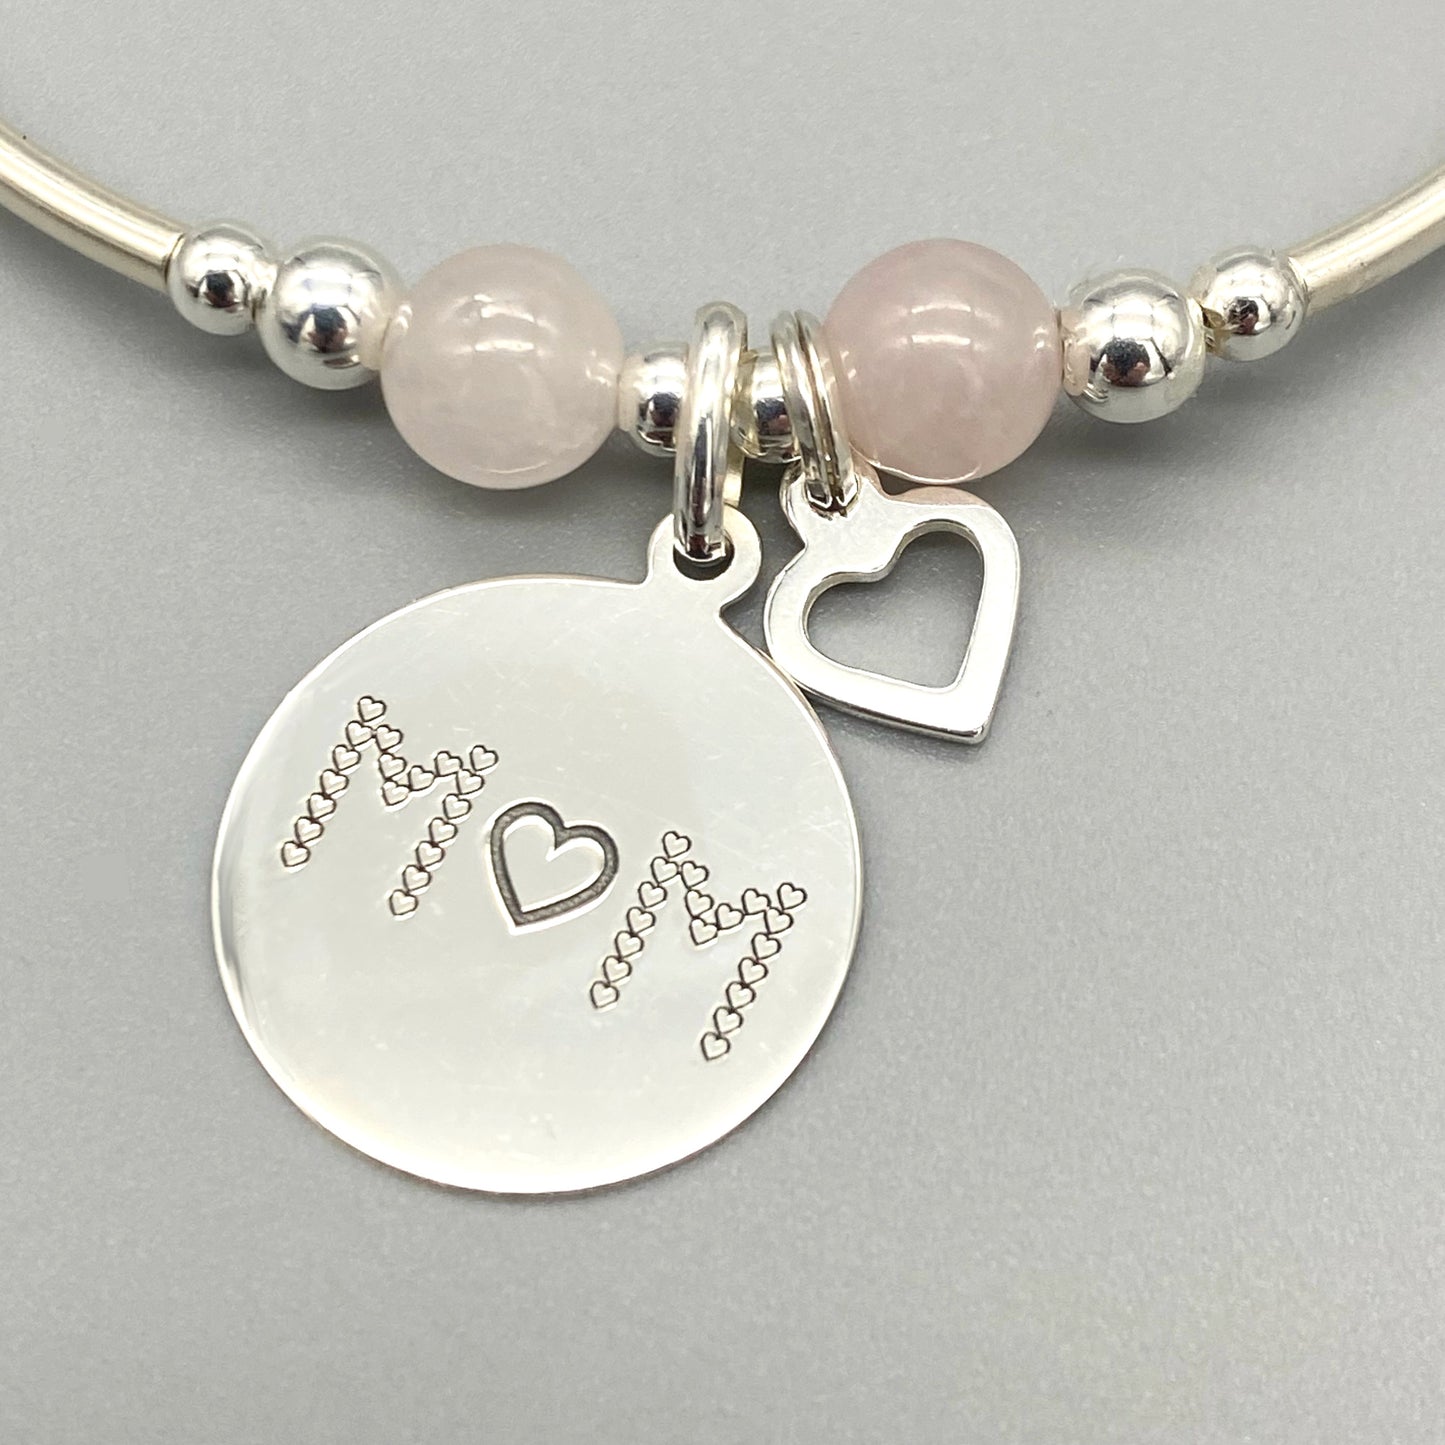 "Mother's Love is Like No Other" heart charm silver rose quartz women's stacking bracelet by My Silver Wish